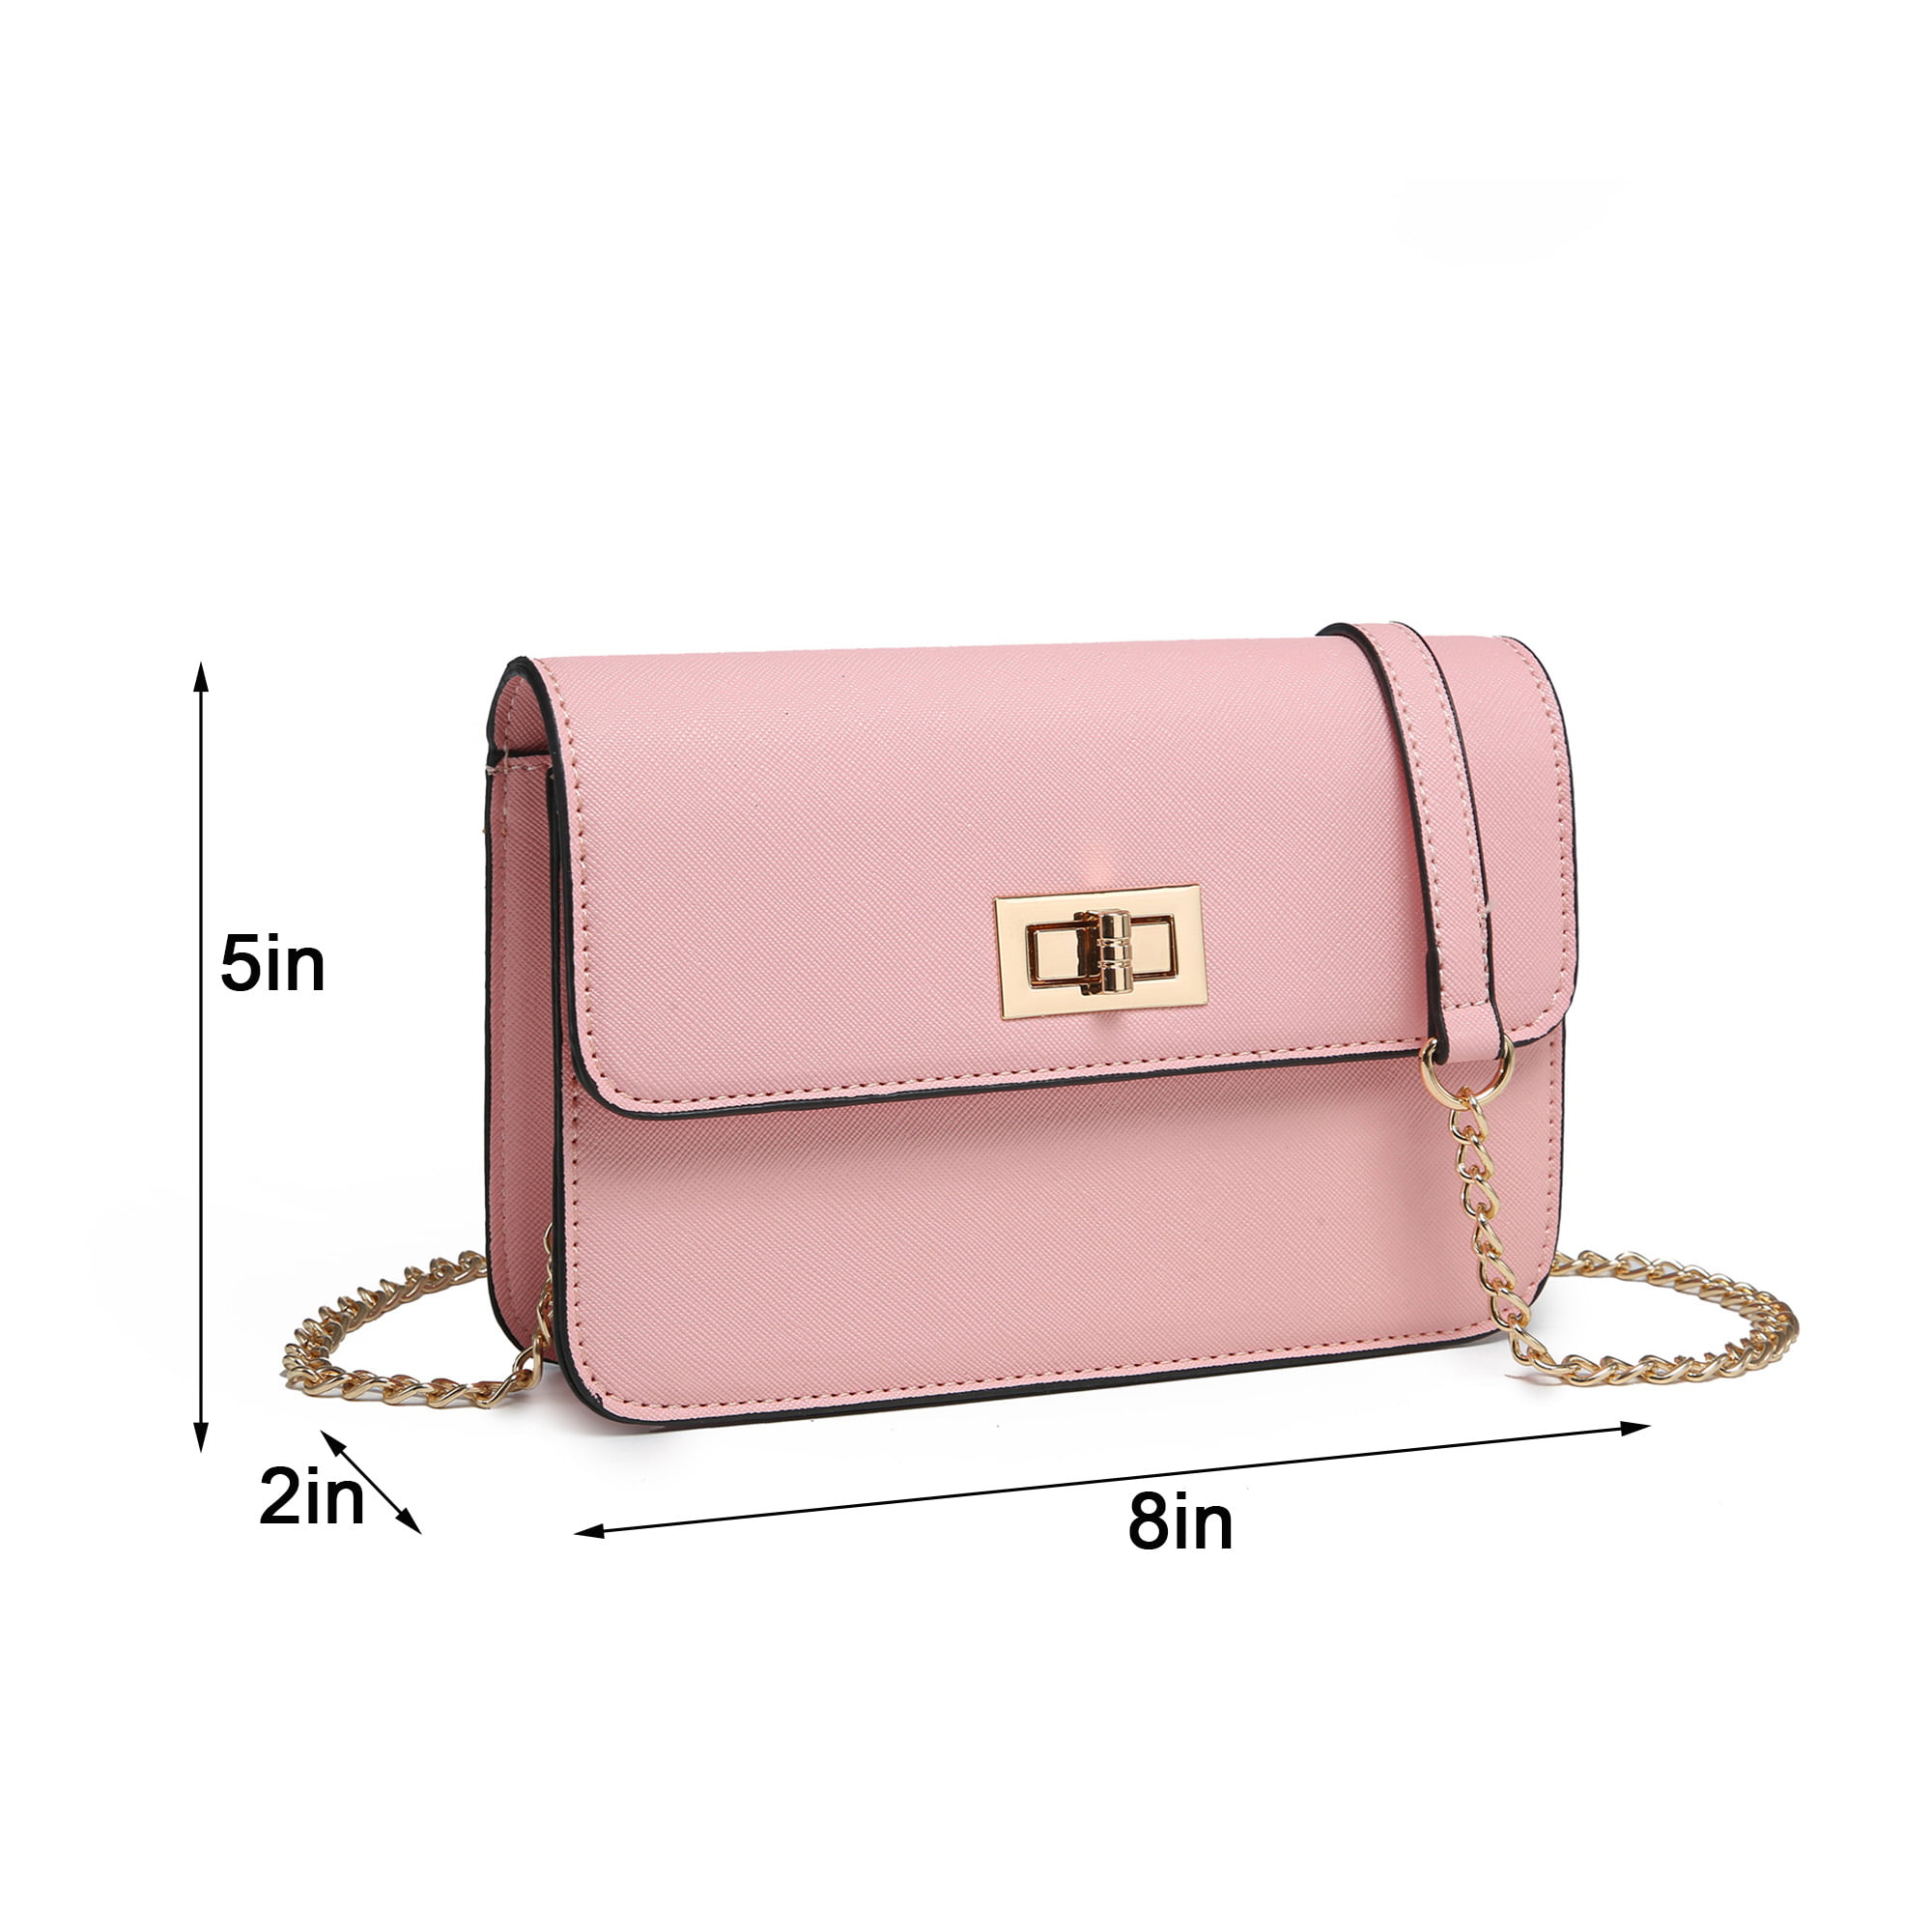 Poppy Womens Quilted Crossbody Bag Handbags Vegan Leather Purses For Women  Shoulder Bag With Chain Strap 